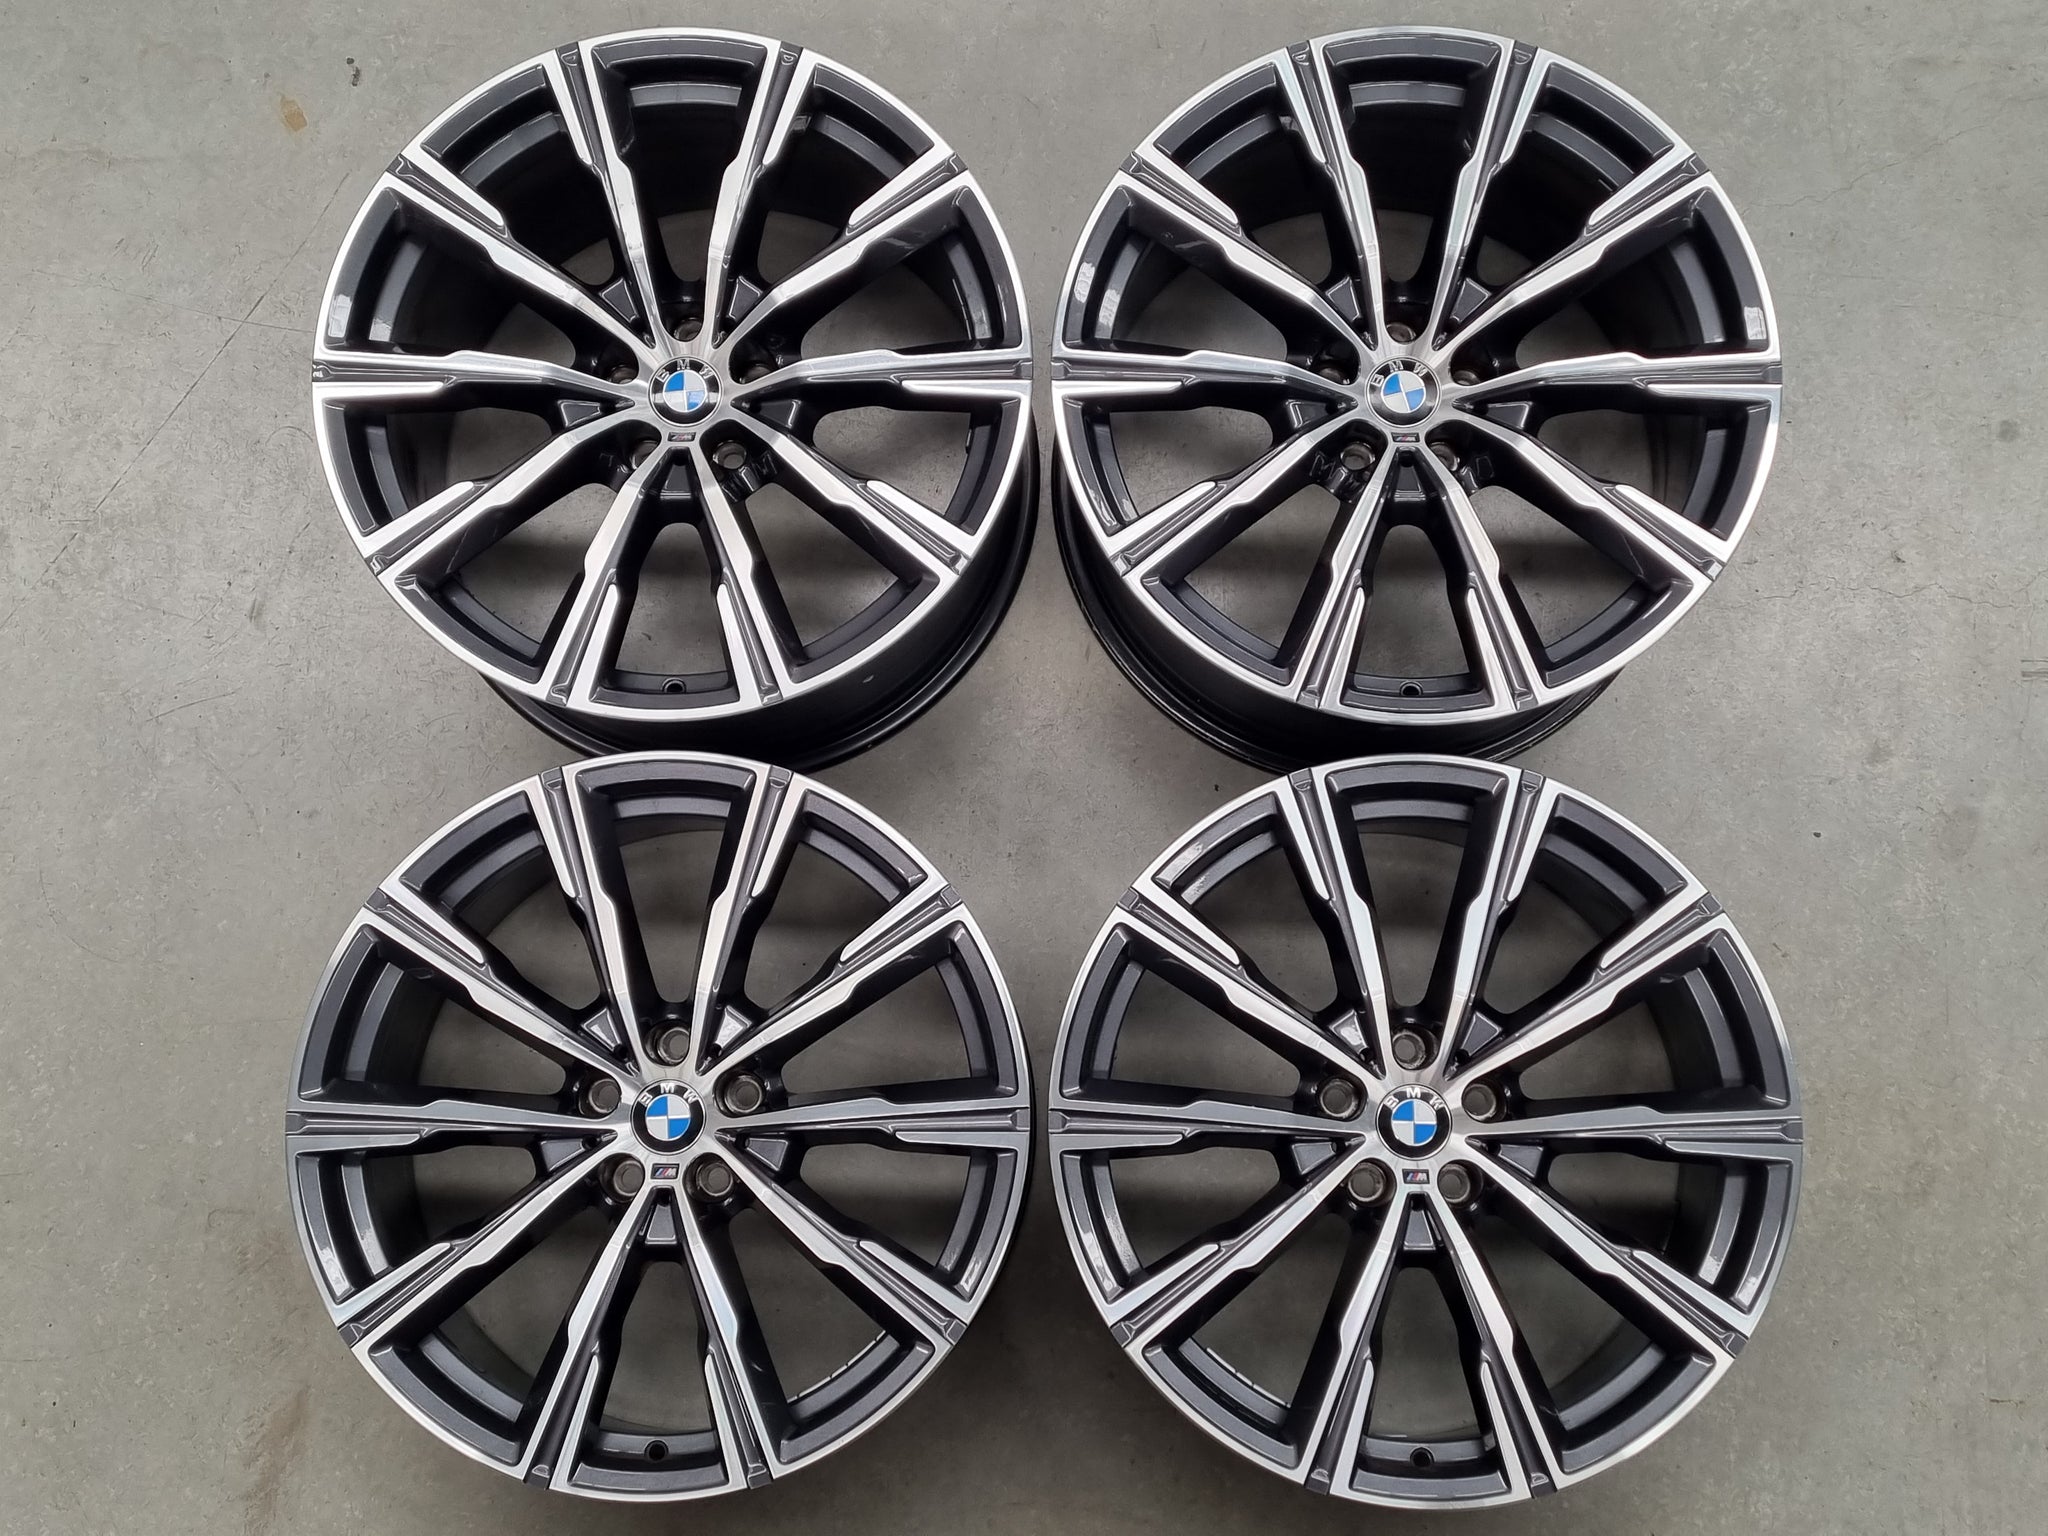 Load image into Gallery viewer, Genuine BMW X5 G05 and X6 G06 Style M740 20 Inch Alloy Wheels Set of 4
